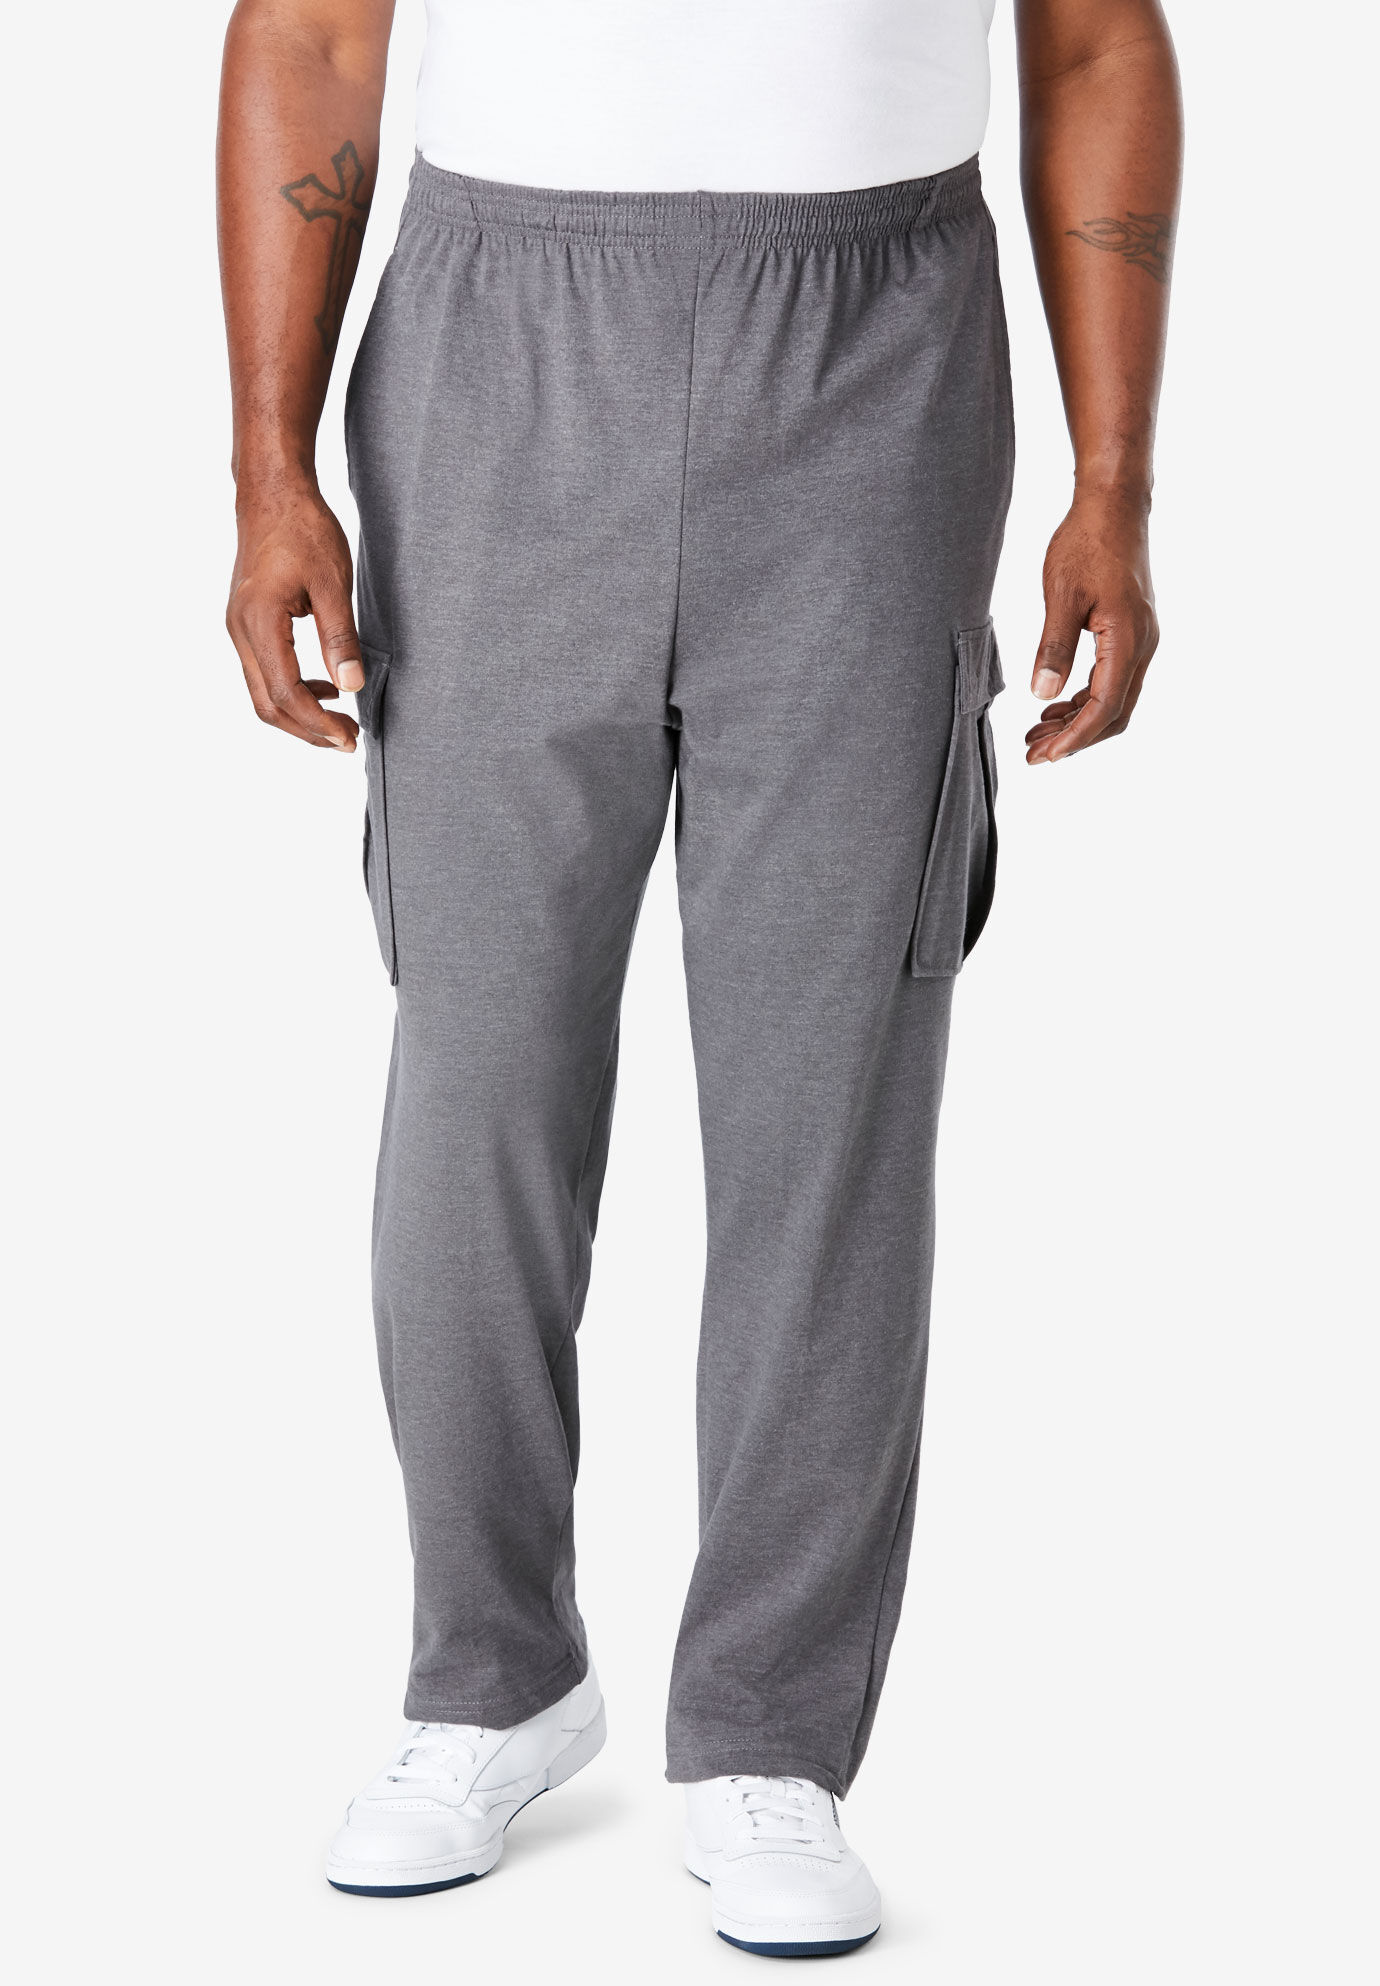 big and tall outdoor pants